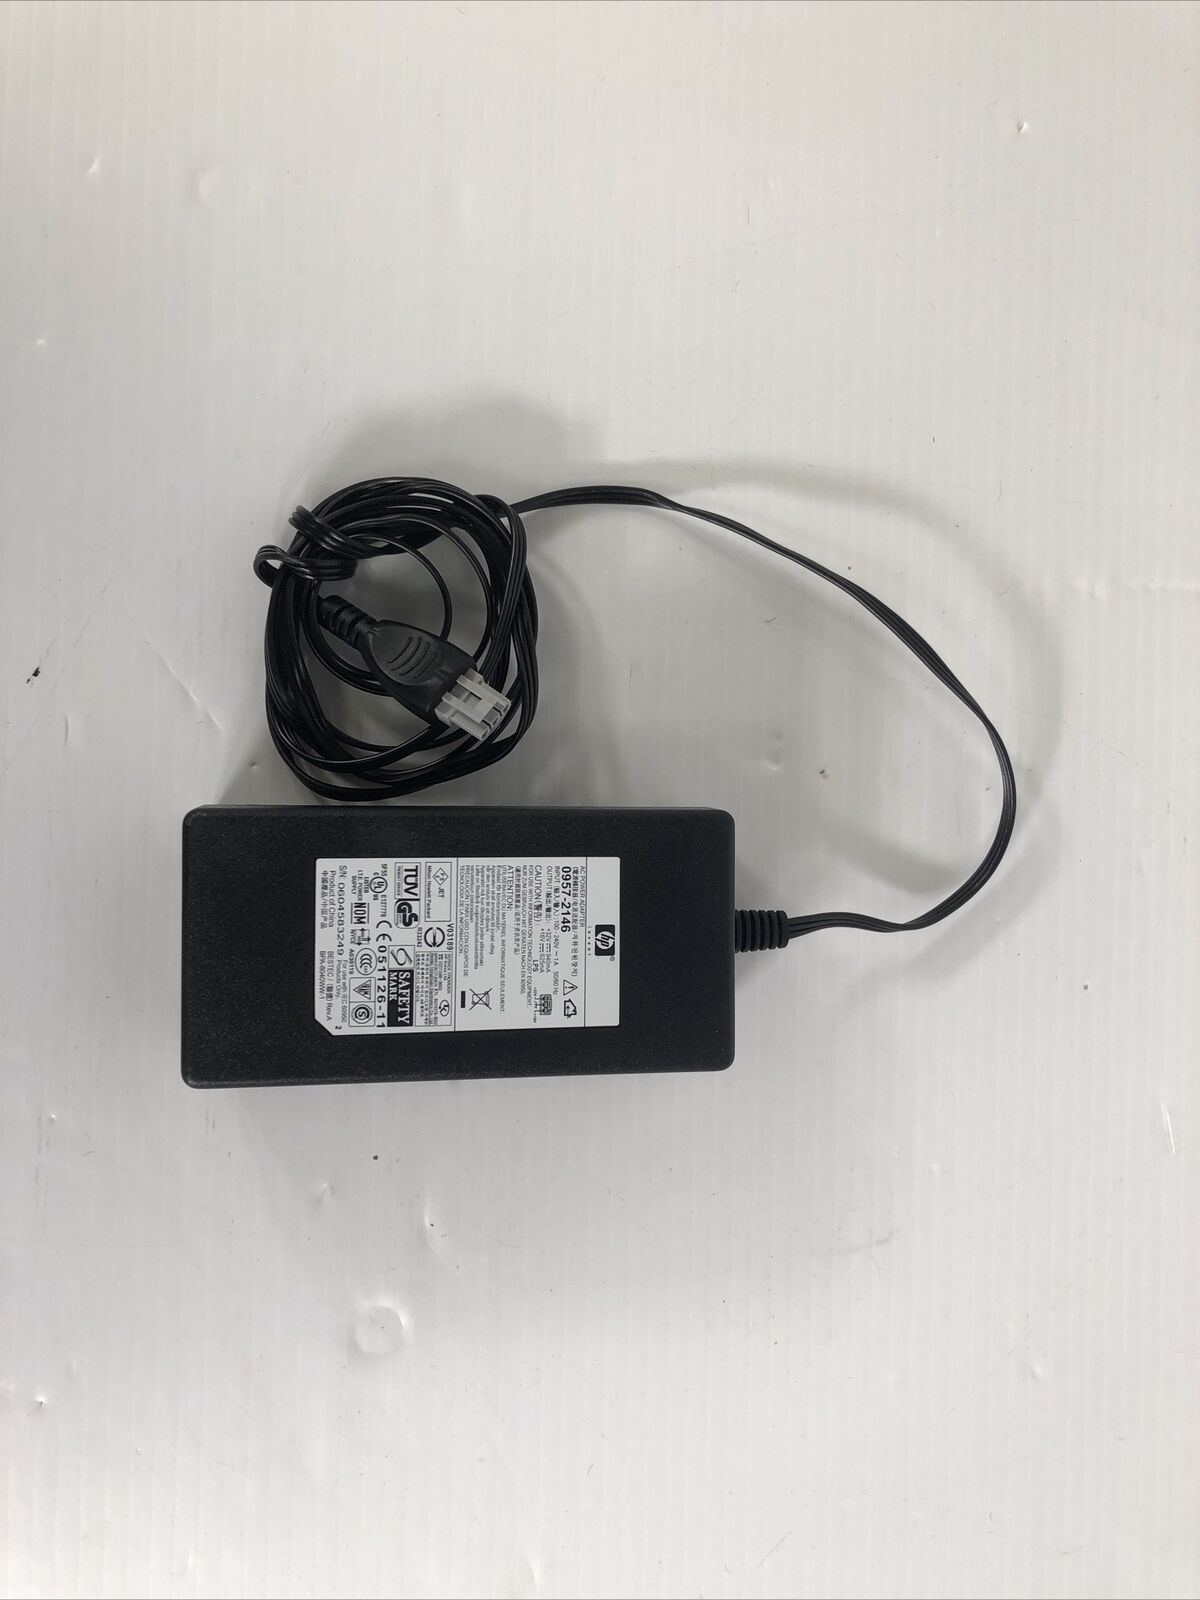 0957-2146 0957-2094 AC Adapter Power for HP Photosmart C3140 C4180 PSC 1350 1510